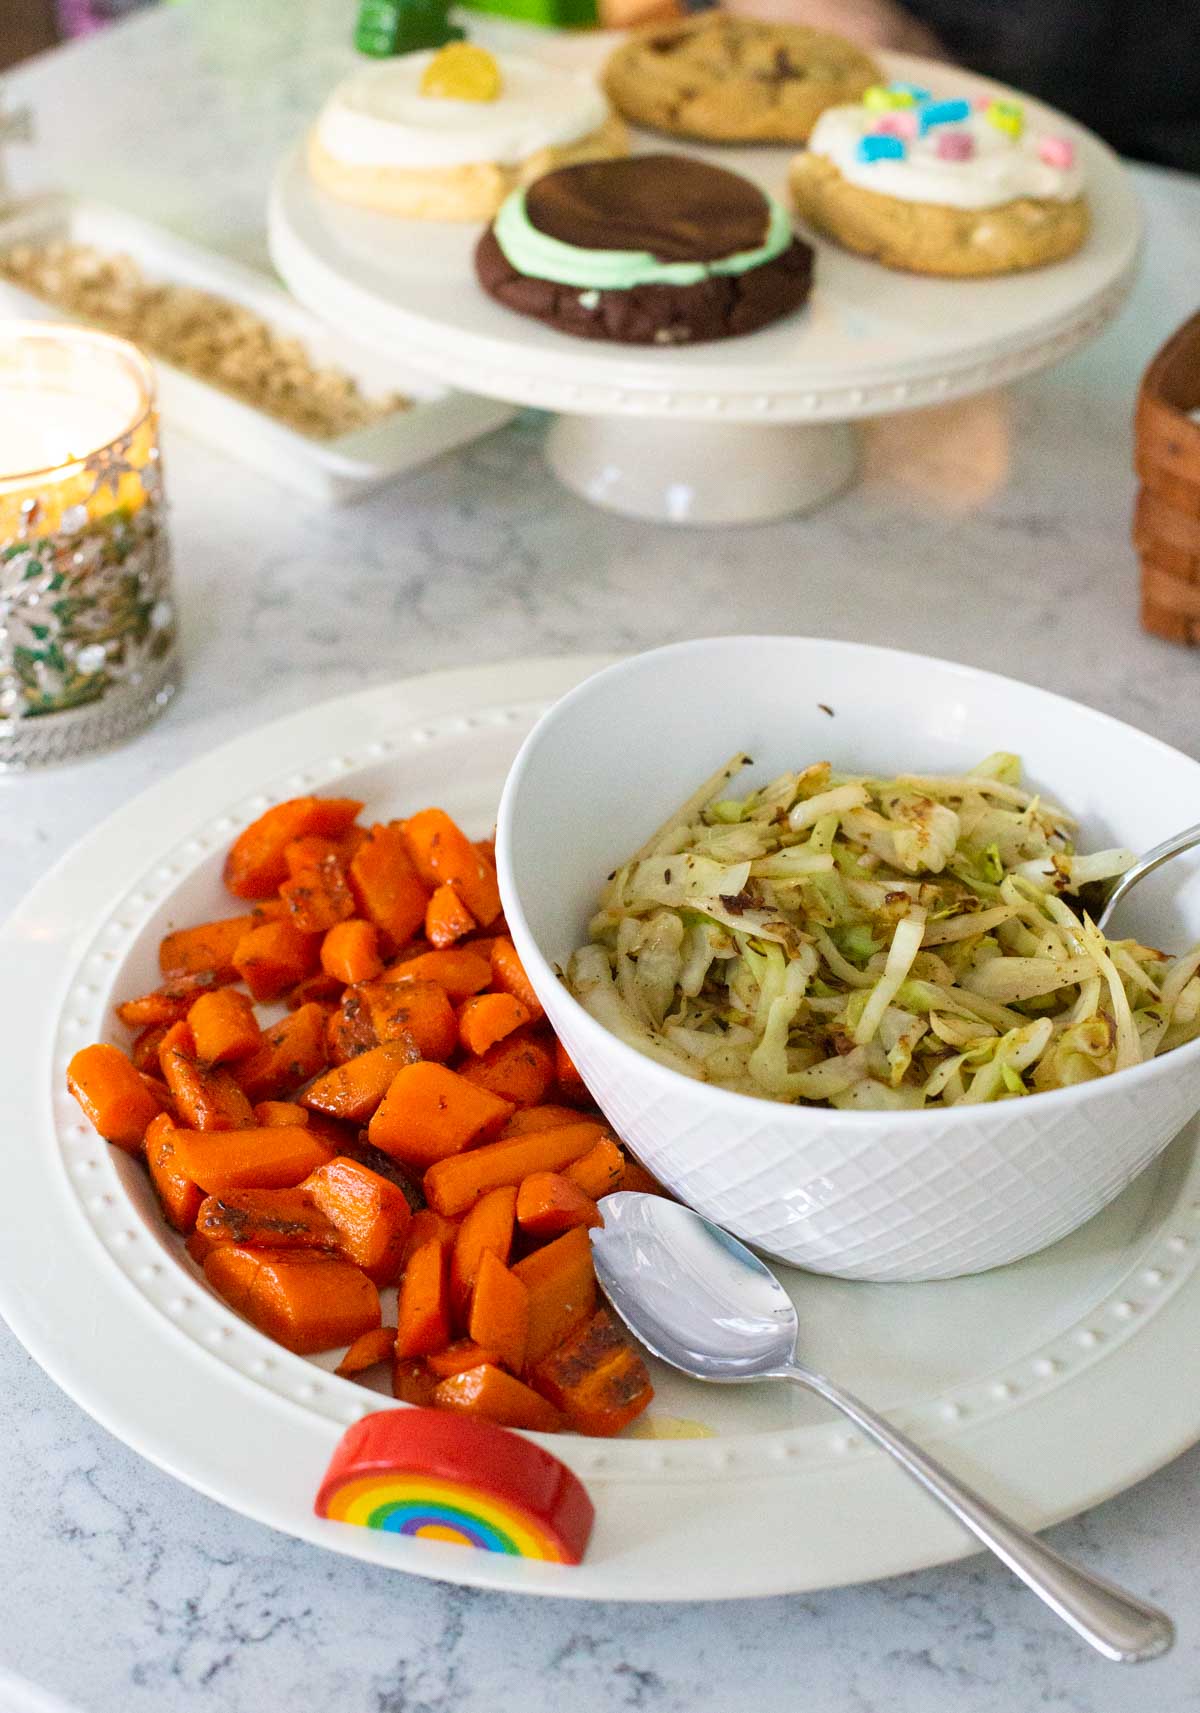 Glazed carrots and a bowl of fried cabbage are ready to be served.